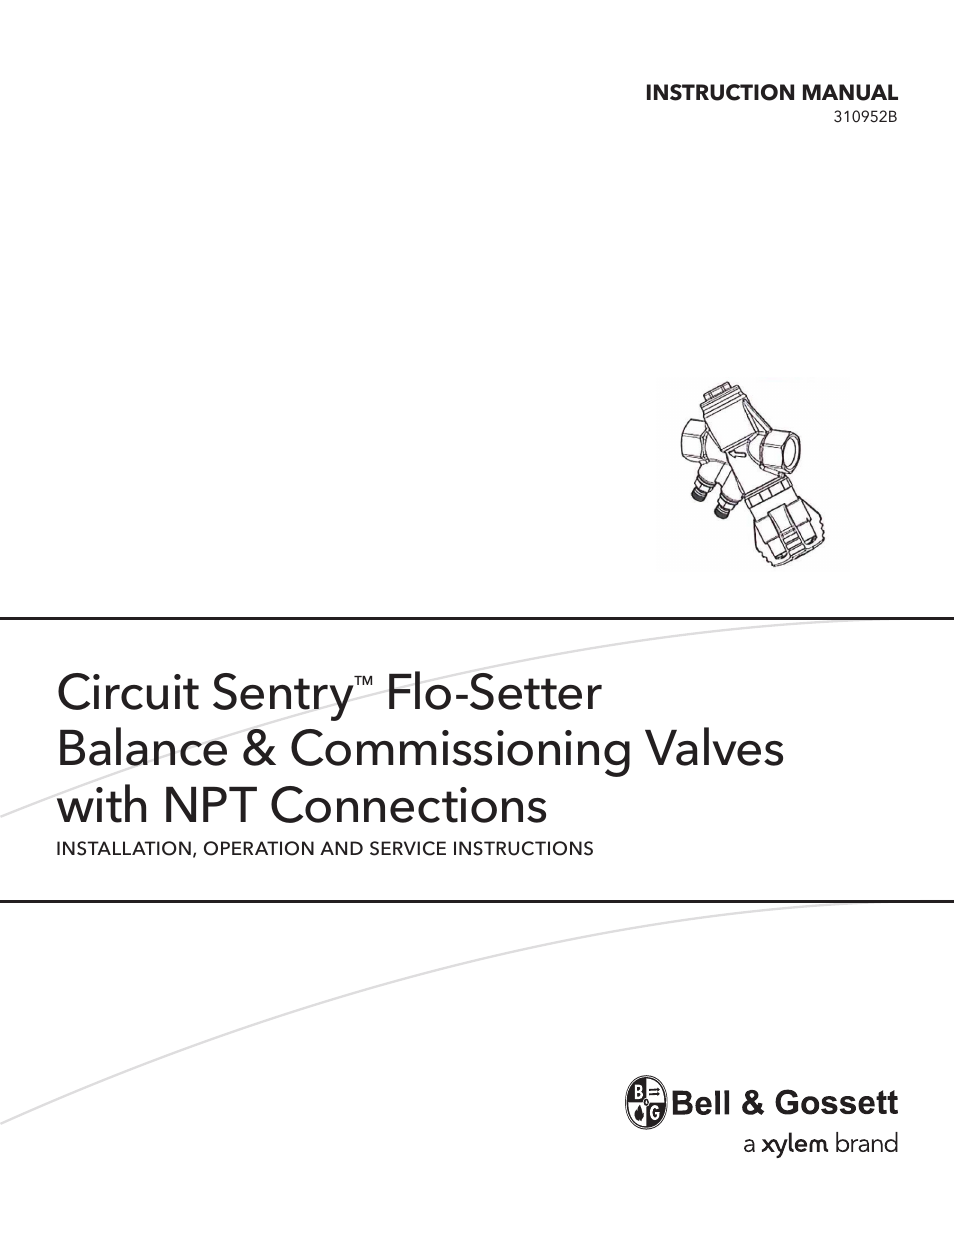 310952B Circuit Sentry Flo-Setter Balance & Commissioning Valves with NPT Connections